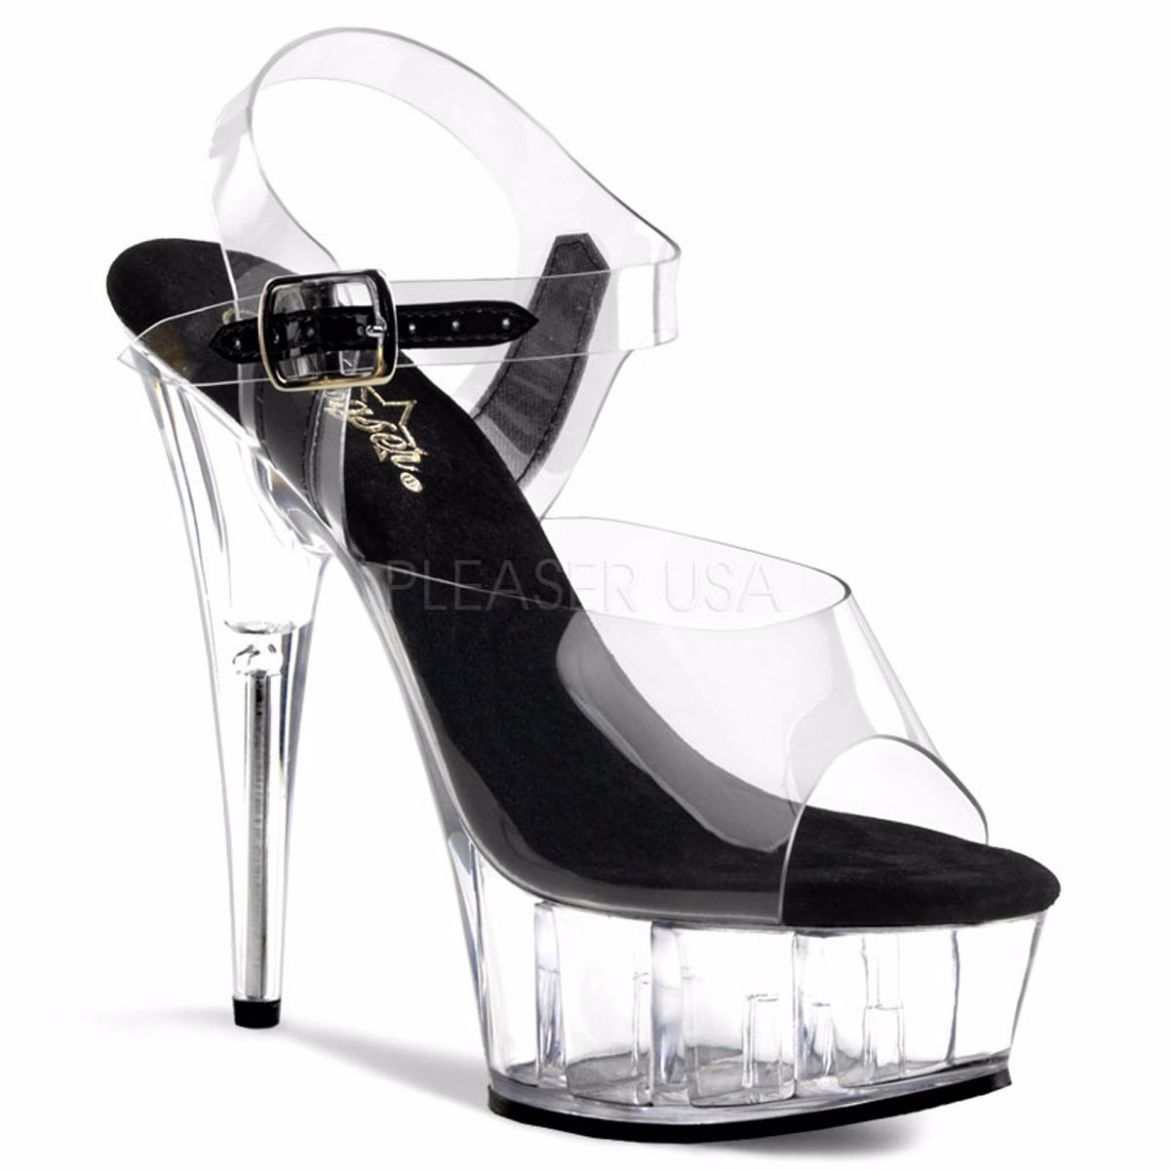 Product image of Pleaser Delight-608 Clear-Black/Clear, 6 inch (15.2 cm) Heel, 1 3/4 inch (4.4 cm) Platform Sandal Shoes